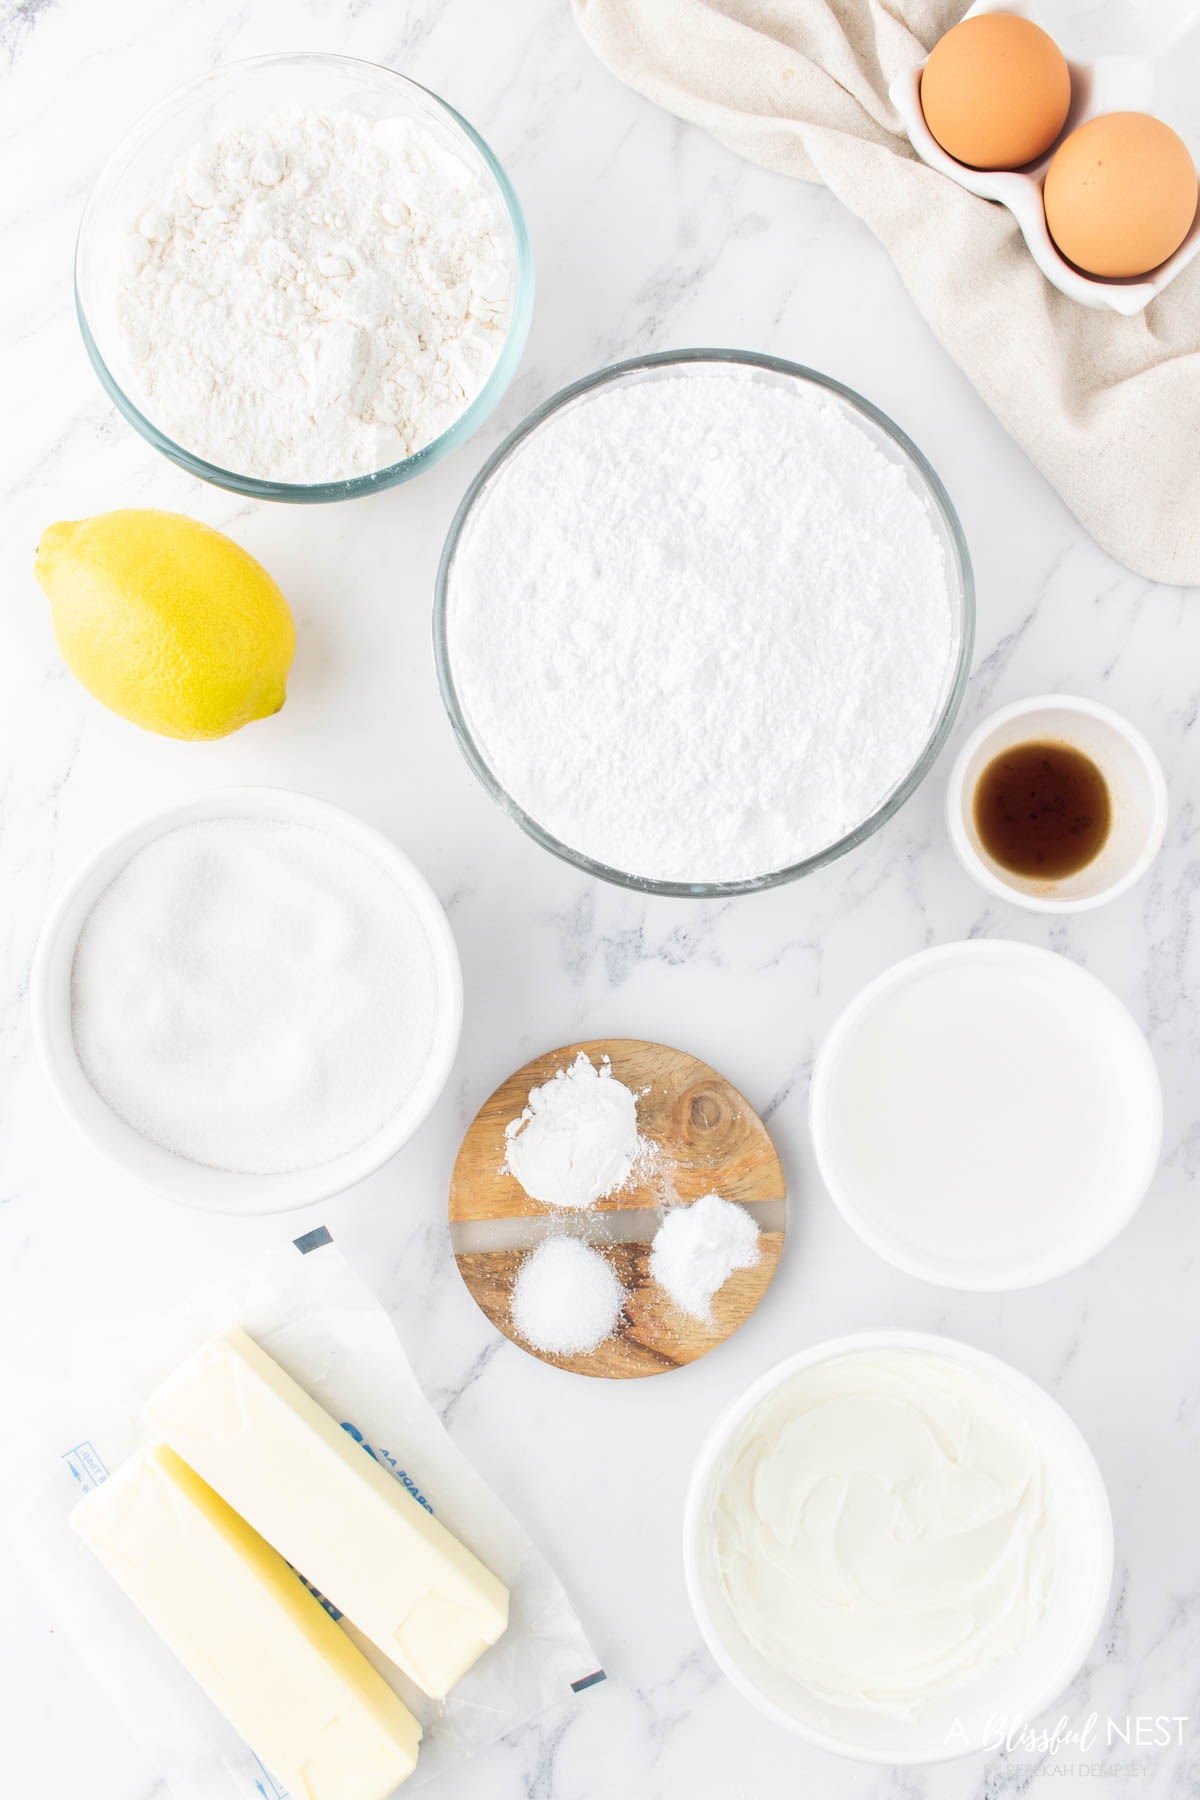 A overhead view of all the ingredients needed to make these yummy lemon cupcakes.